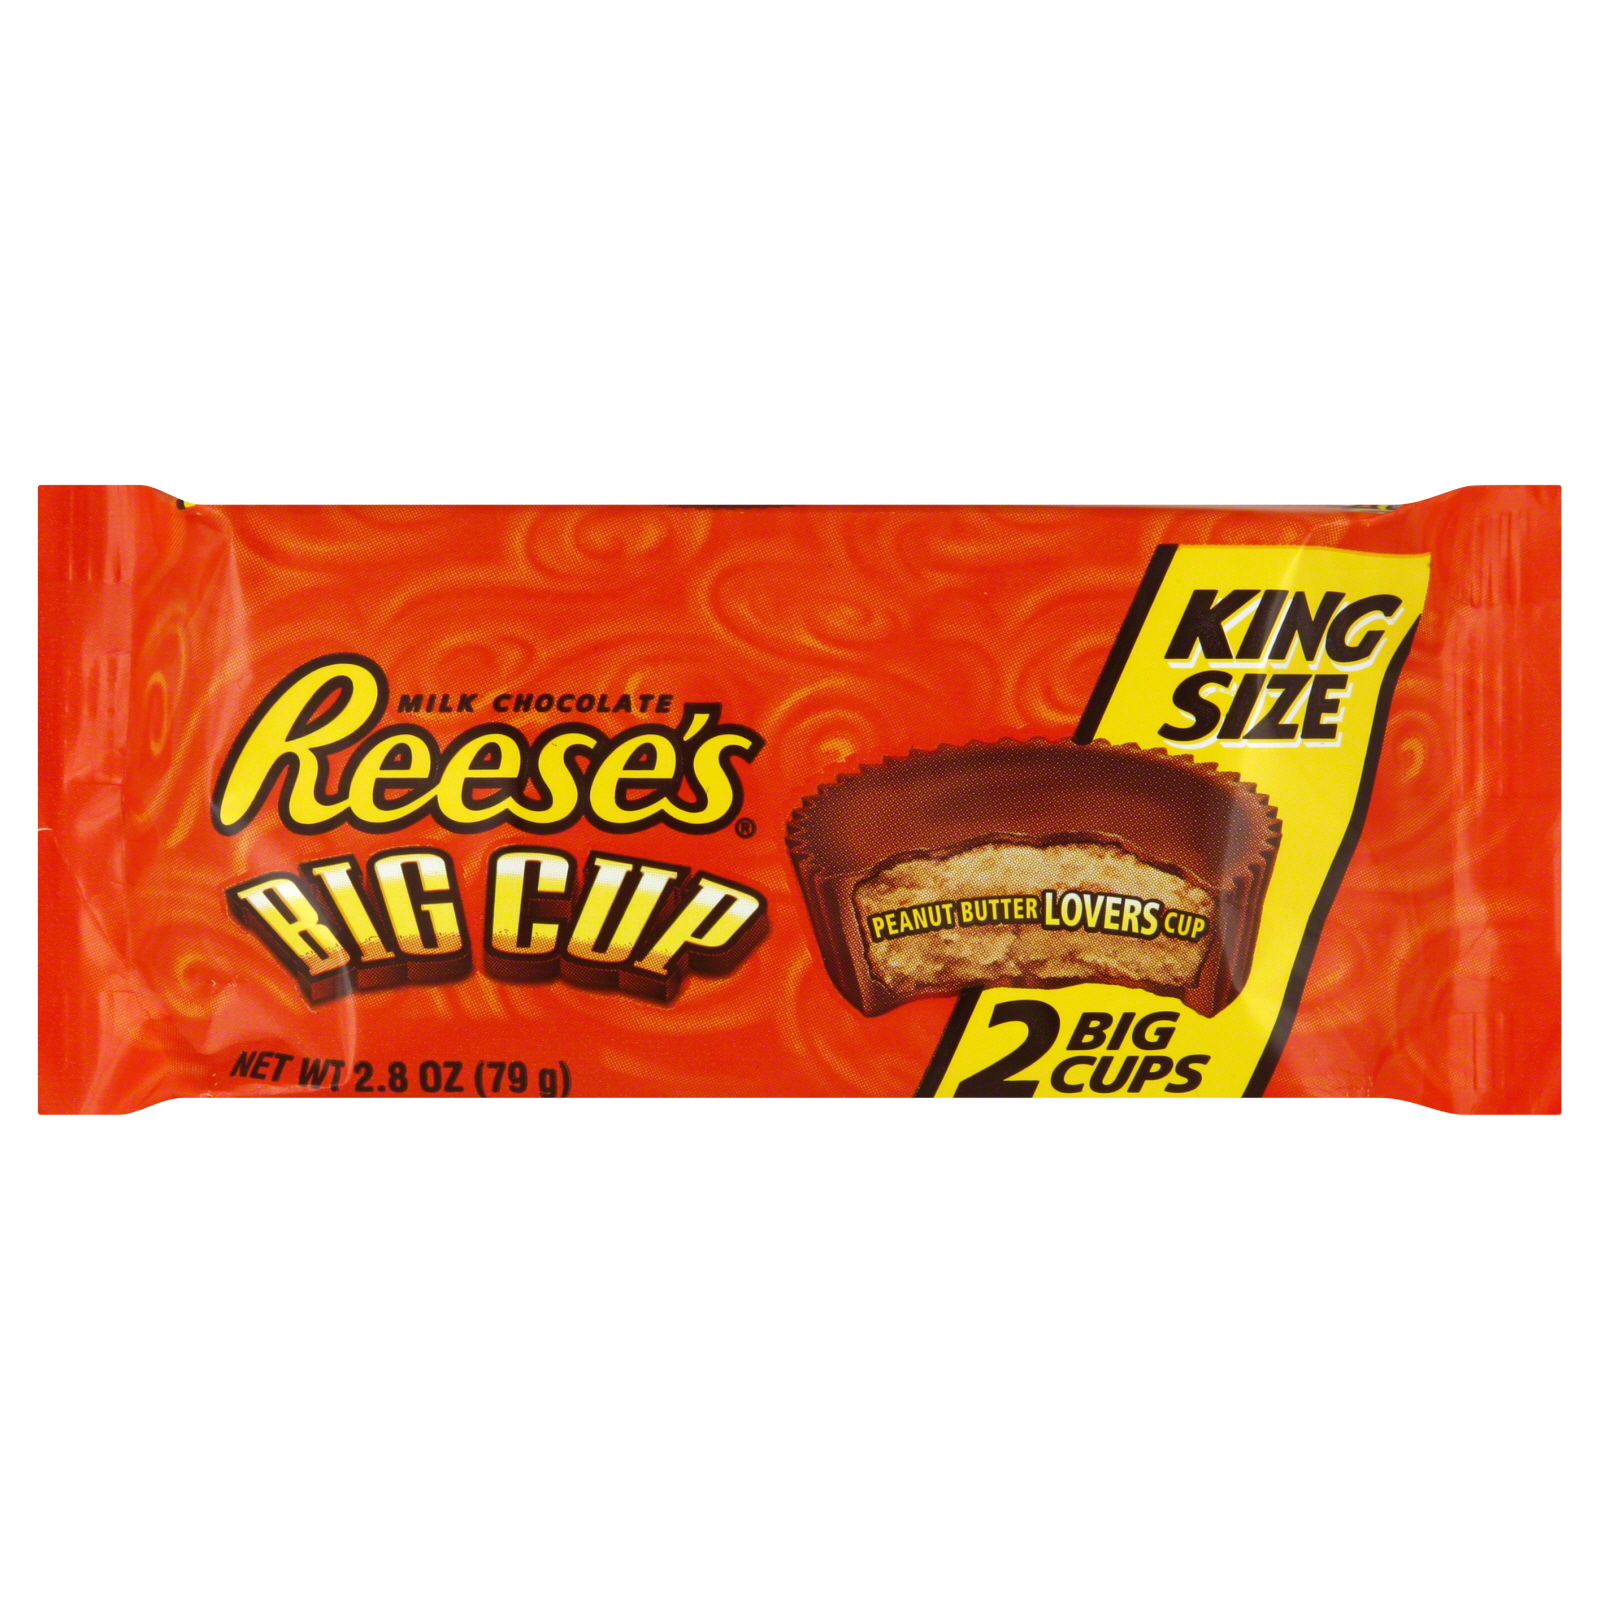 Reese's Peanut Butter Cup, Big Cup, 2.8 oz (79 g)